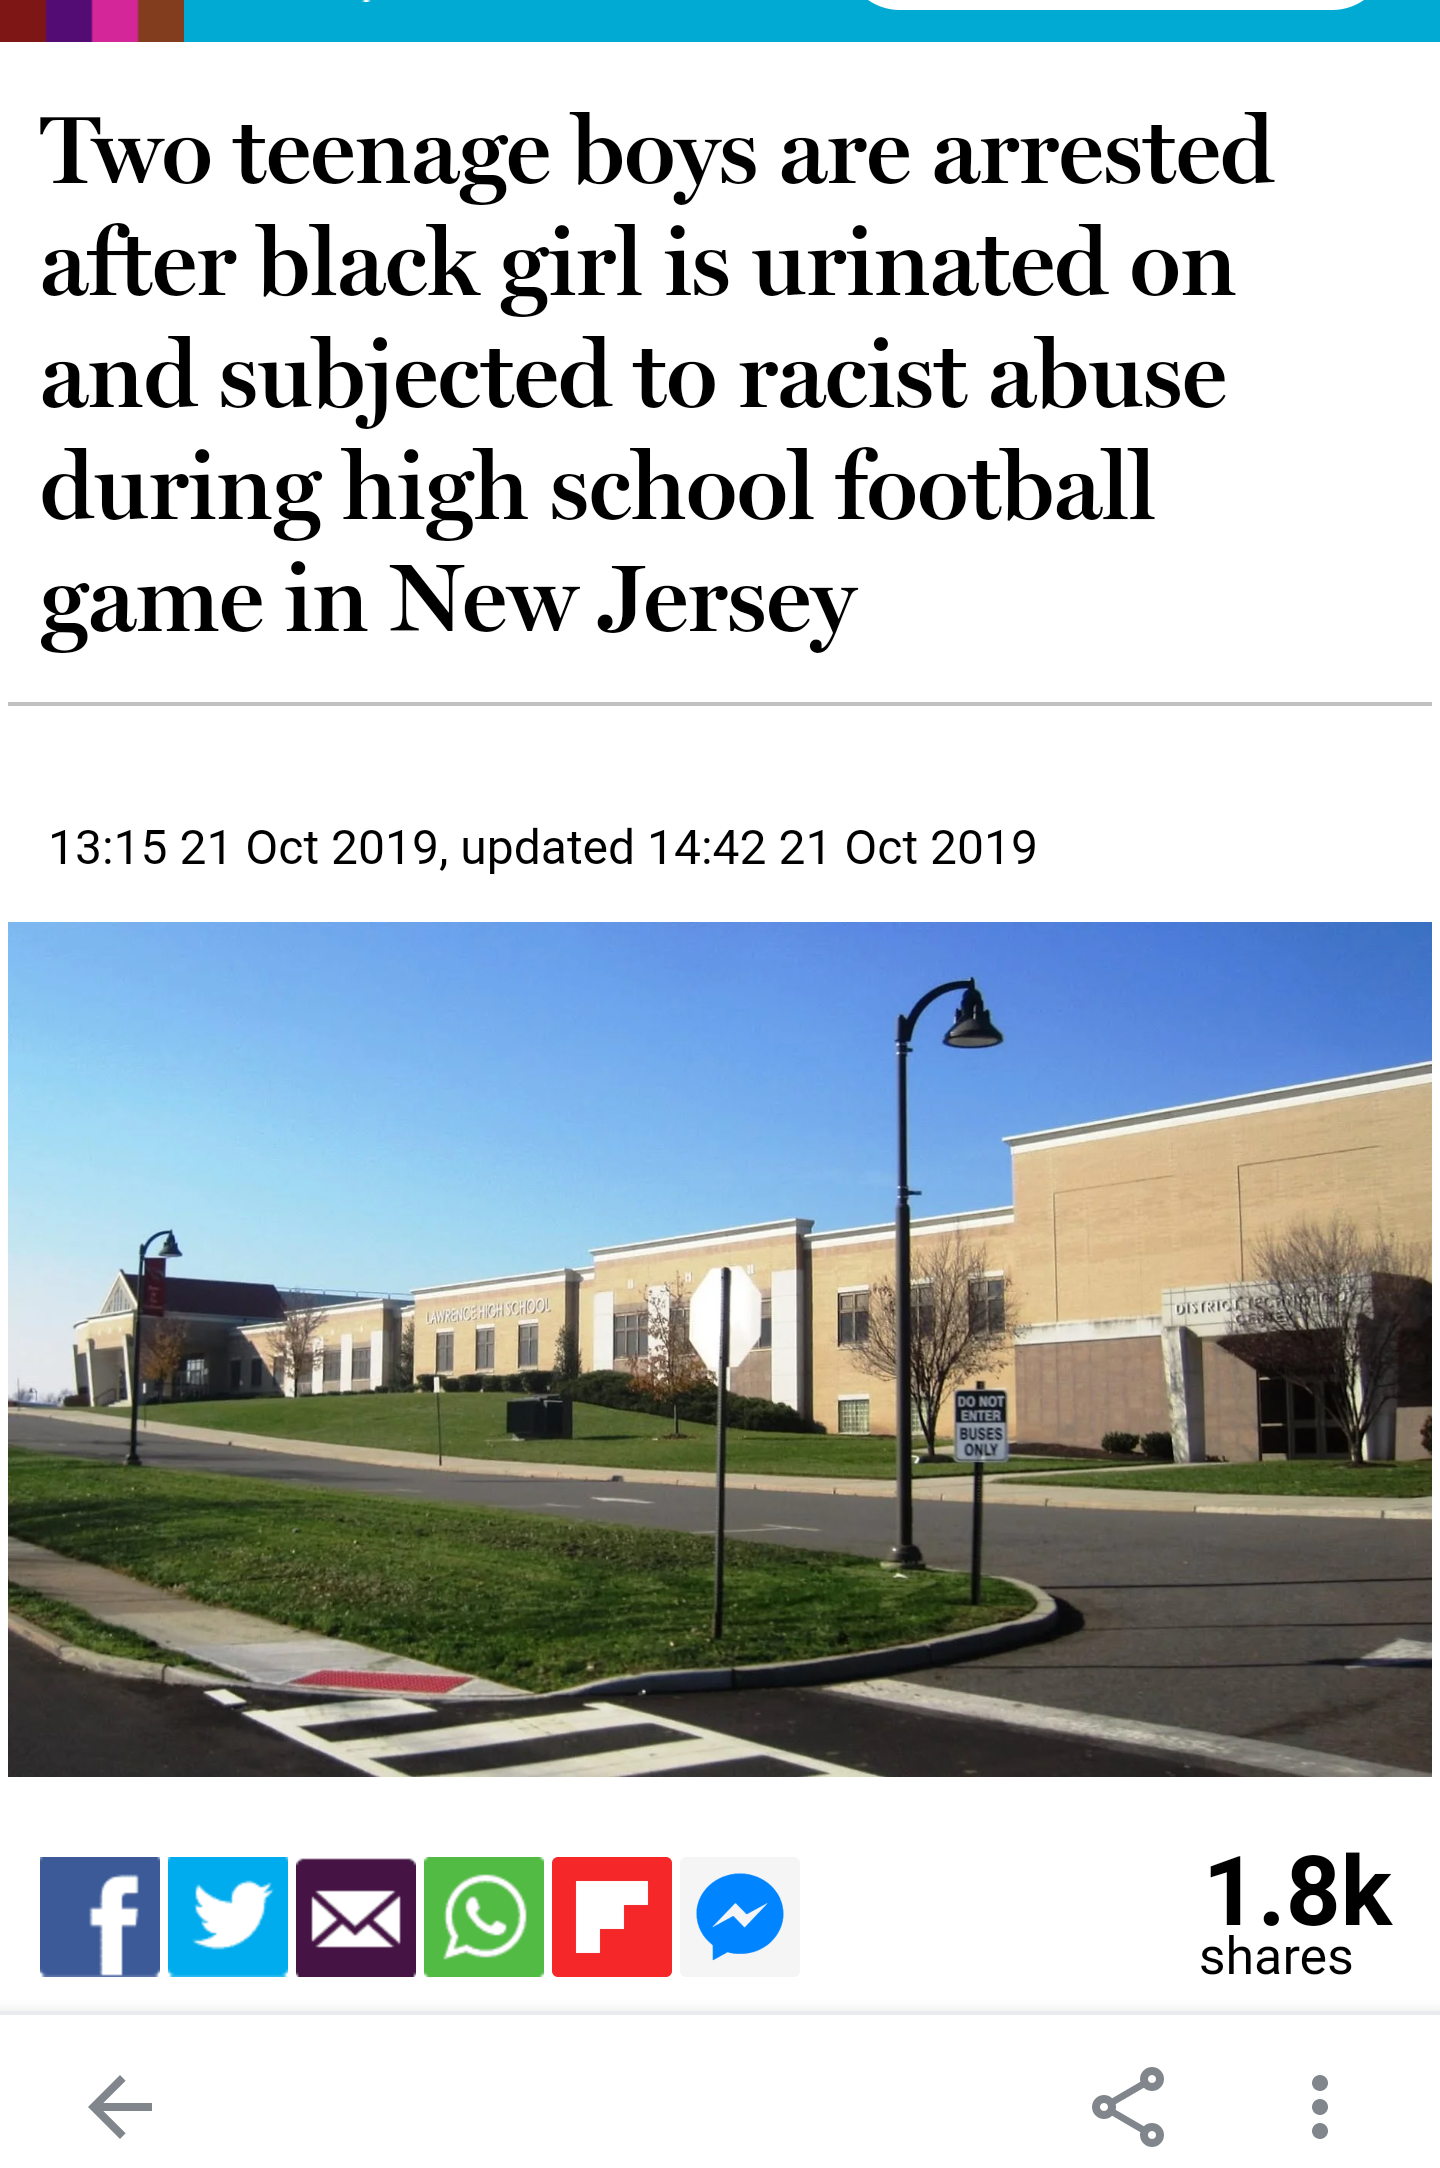 residential area - Two teenage boys are arrested after black girl is urinated on and subjected to racist abuse during high school football game in New Jersey , updated